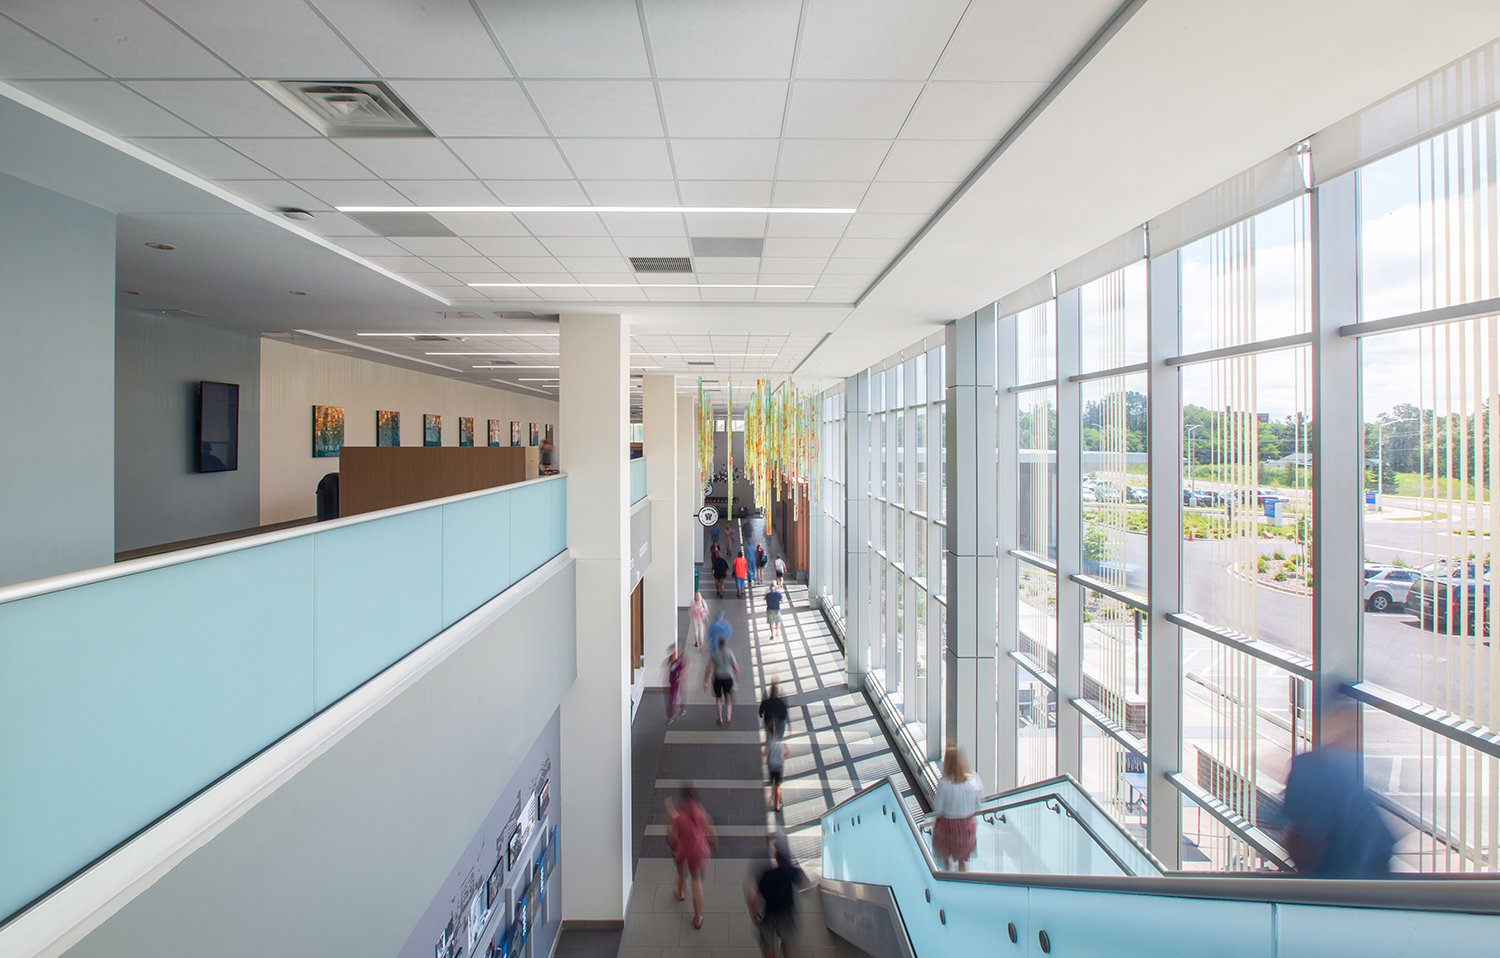 Josh LeClair's photograph of the modern interior at UPHS Marquette.